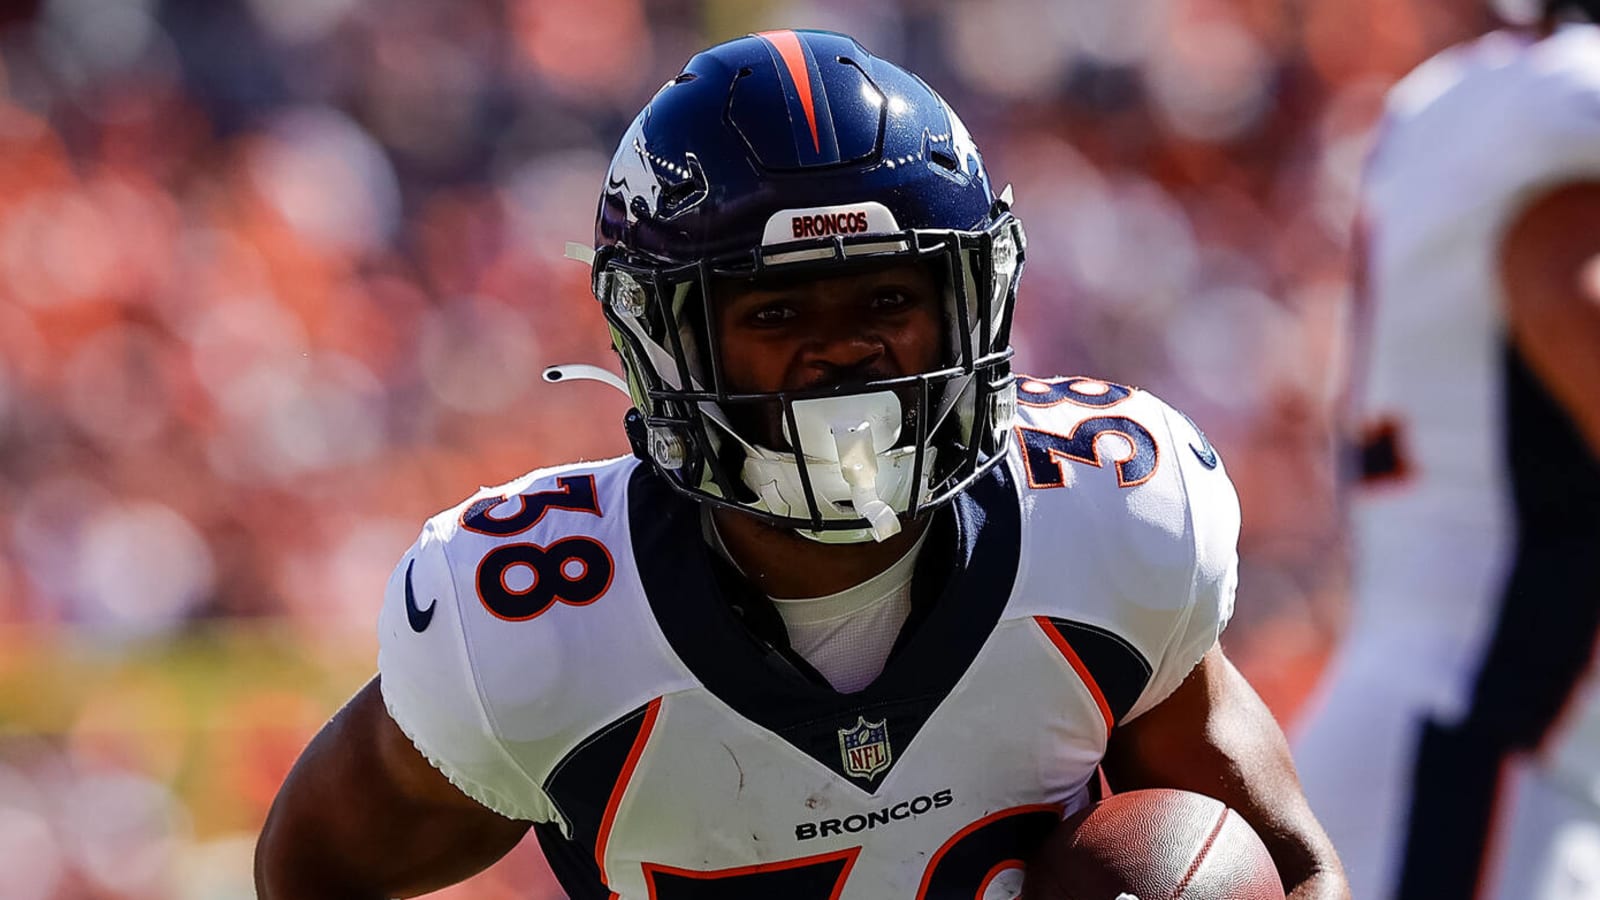 Expect increased role for Broncos rookie RB Jaleel McLaughlin